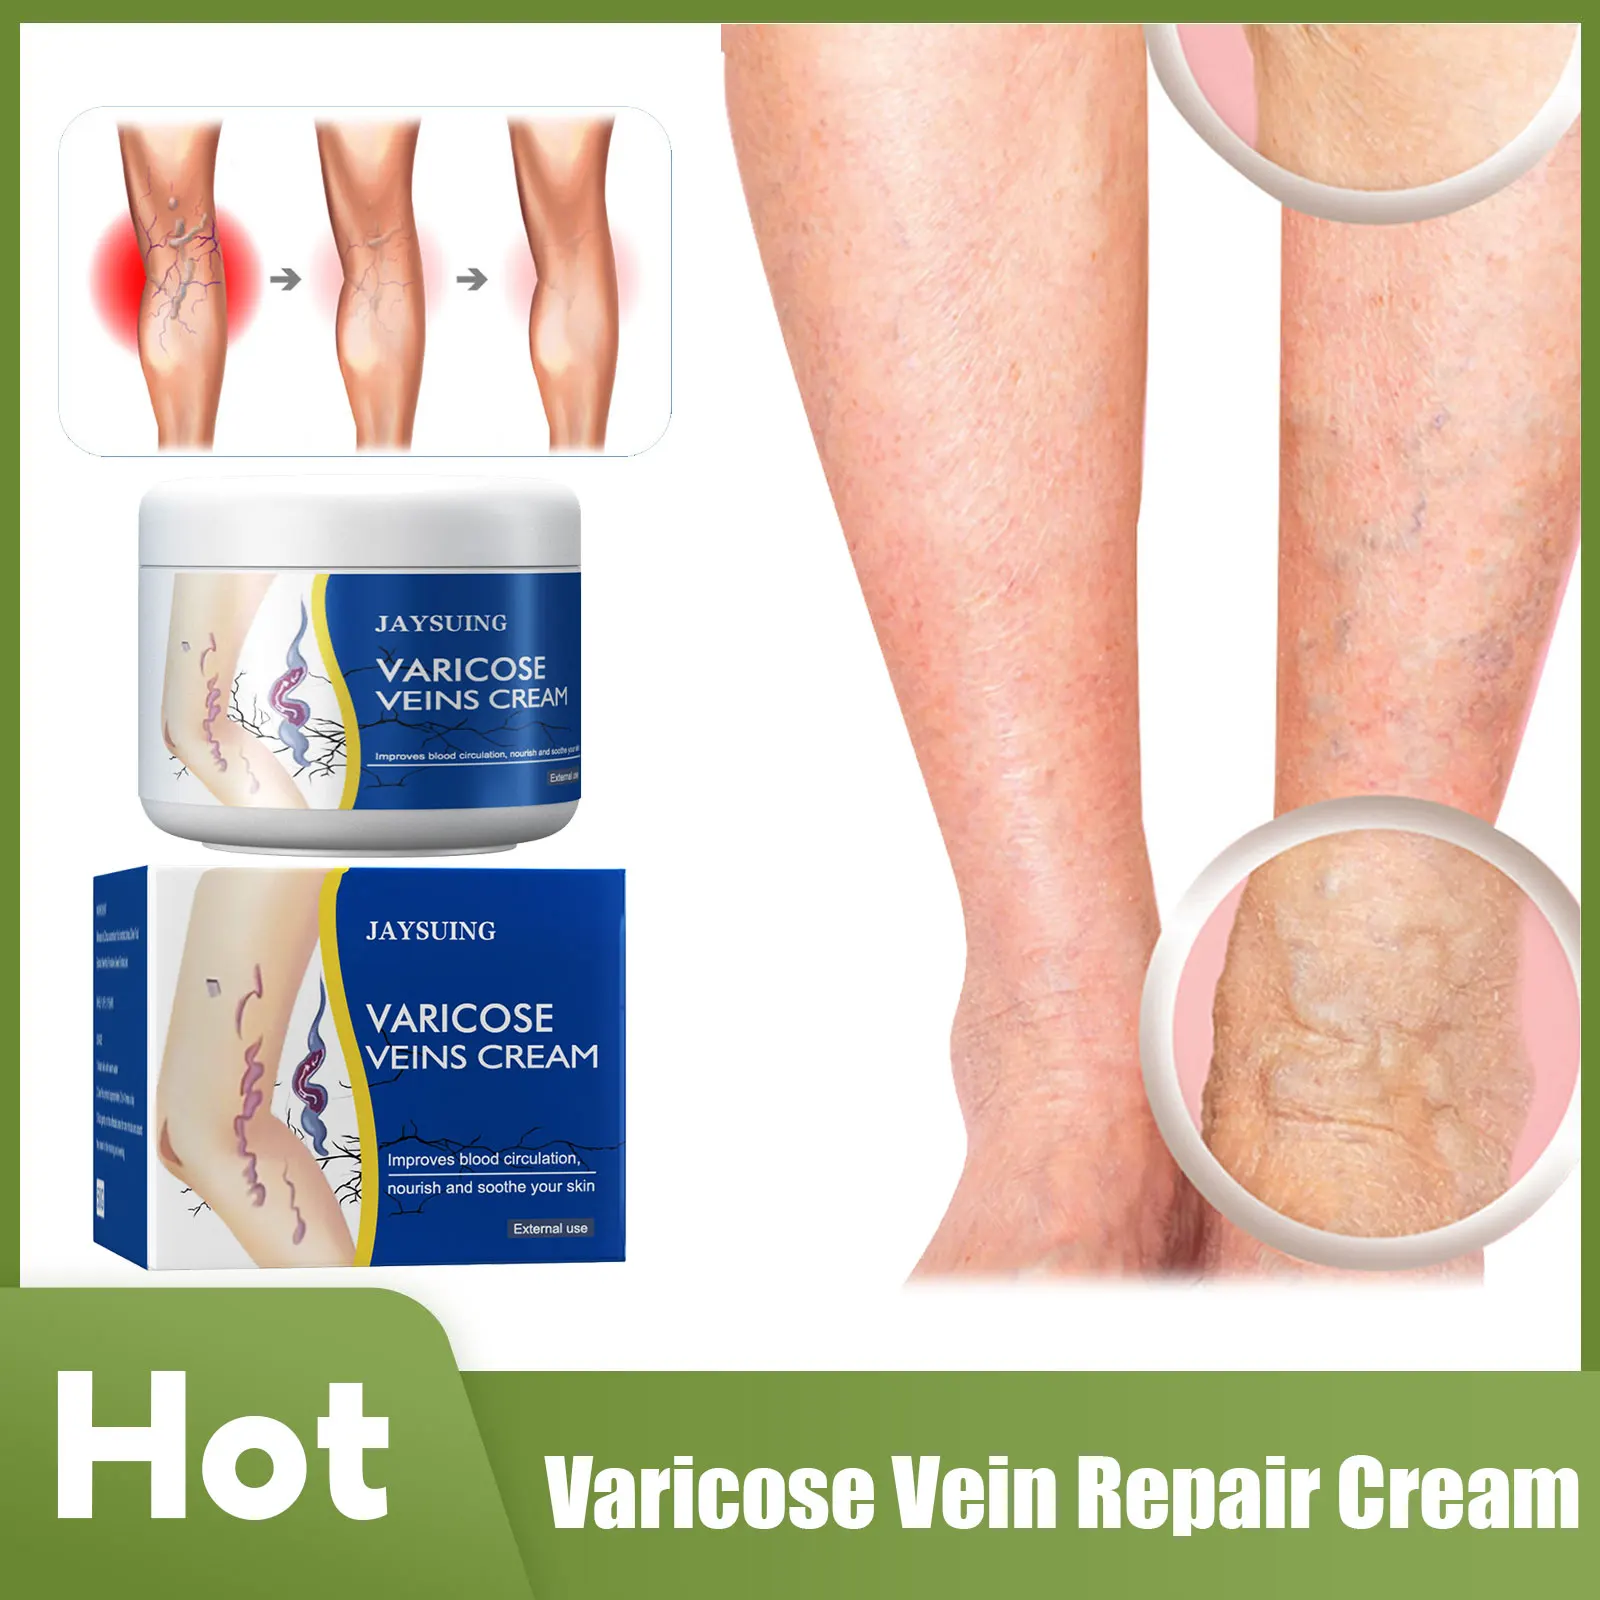 

Varicose Vein Repair Cream Leg Vasculitis Phlebitis Angiitis Spider Shape Veins Pain Swelling Effective Soothing Relief Ointment